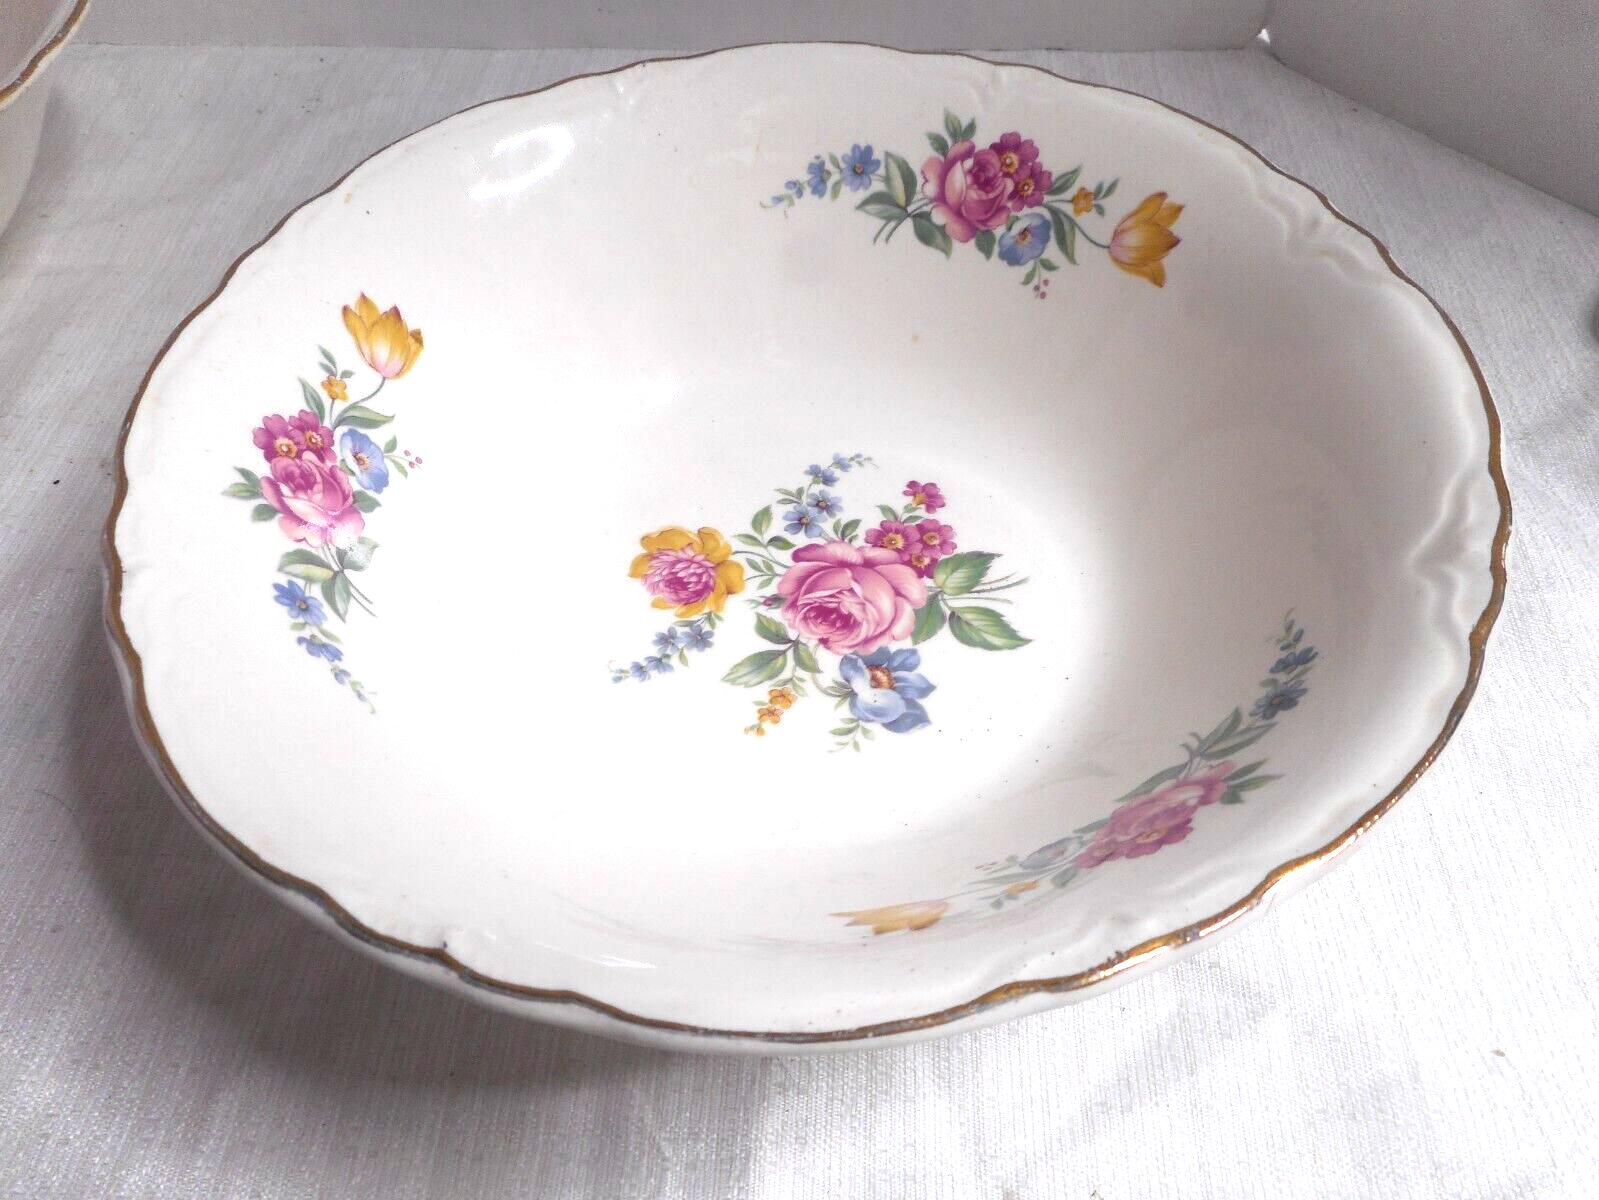 Primary image for Scio Pottery 1940's Hazel Round Vegetable Serving Bowl Floral Gold Trim 8 1/2"